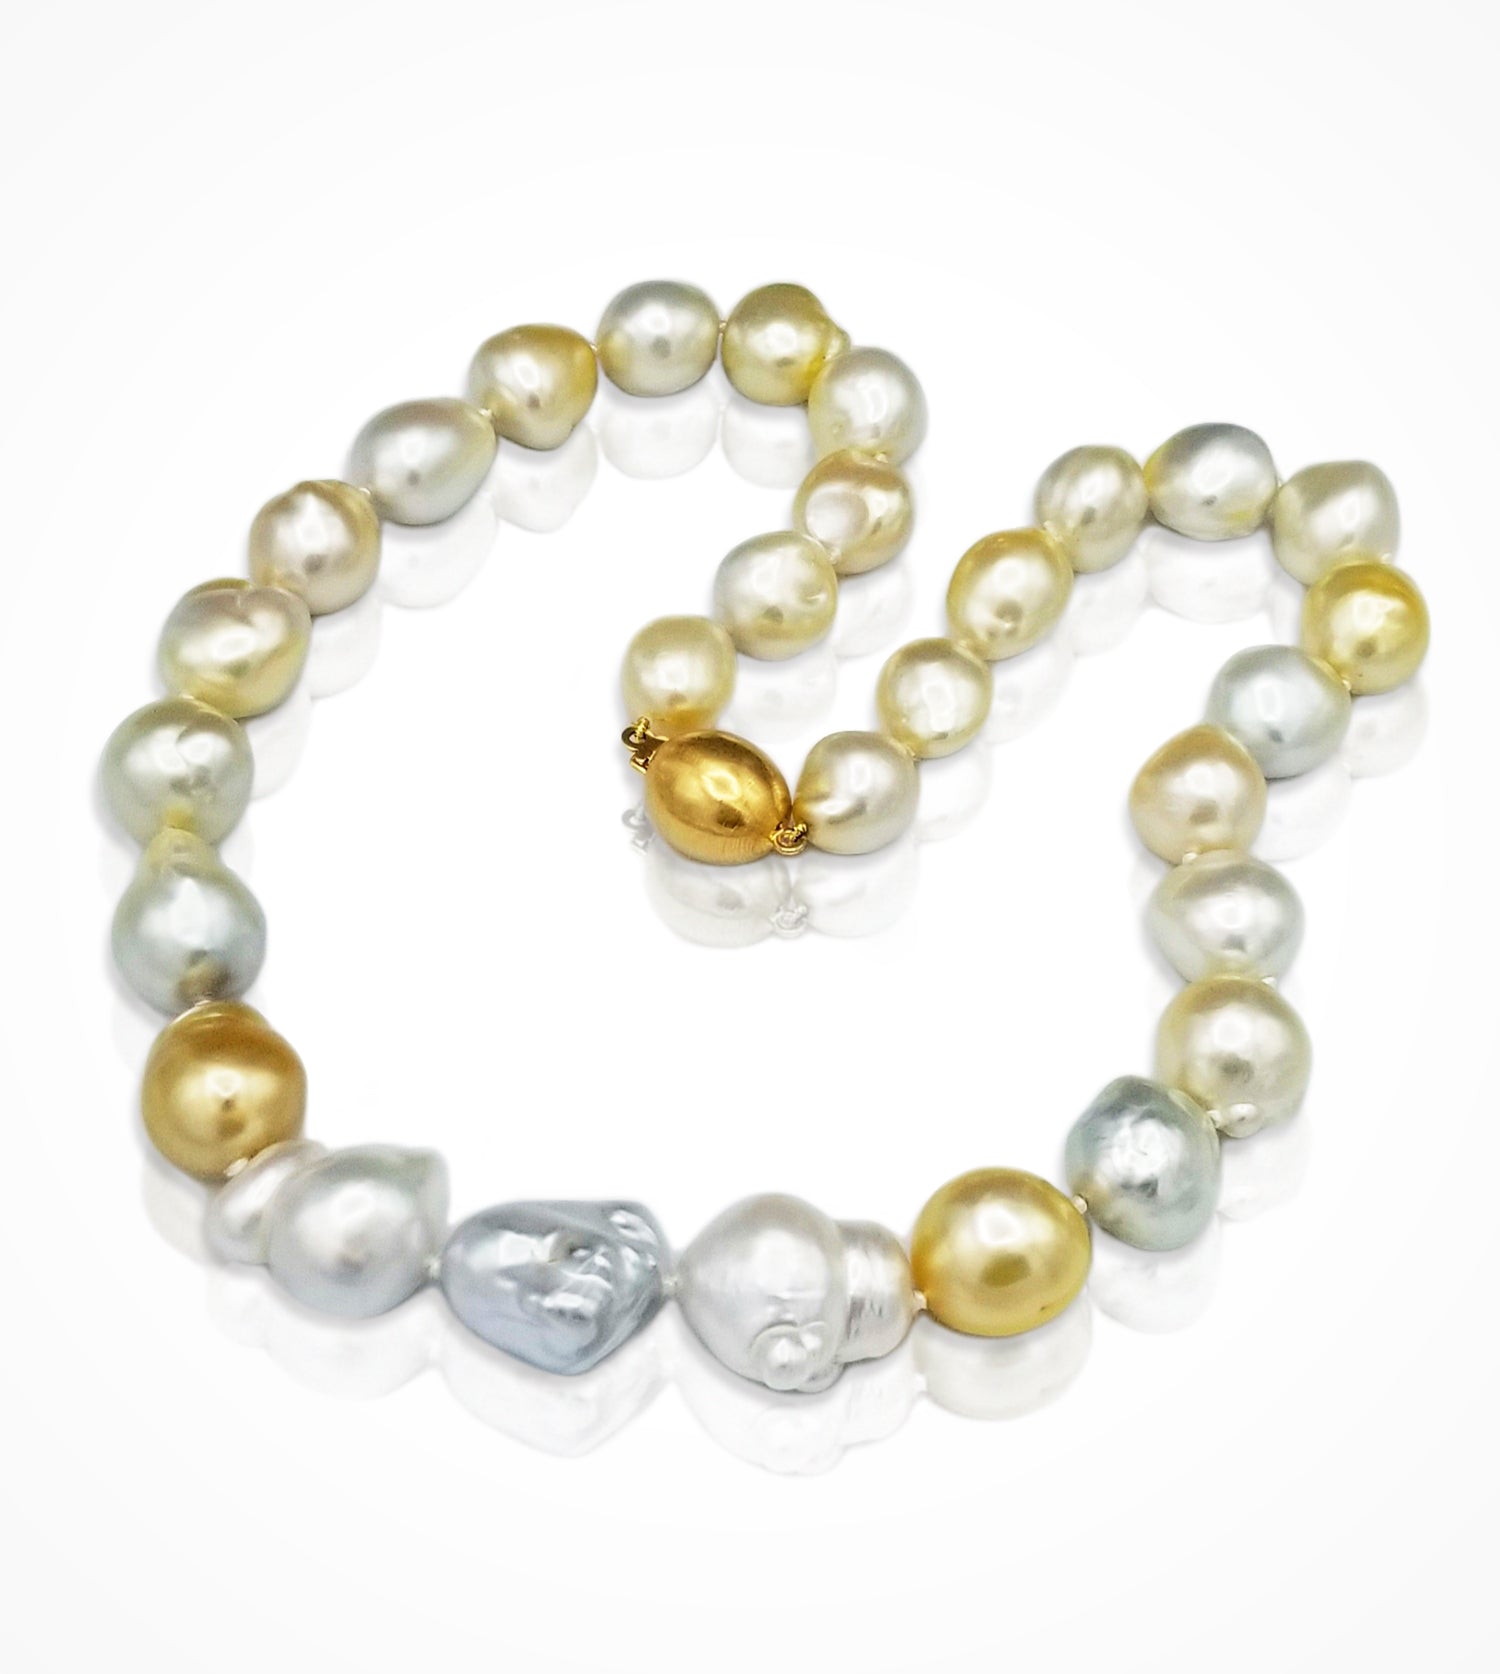 NE-004440 18kt yellow gold clasp and 29 South-Sea golden, white and silver, baroque pearls,-10.4-17mm